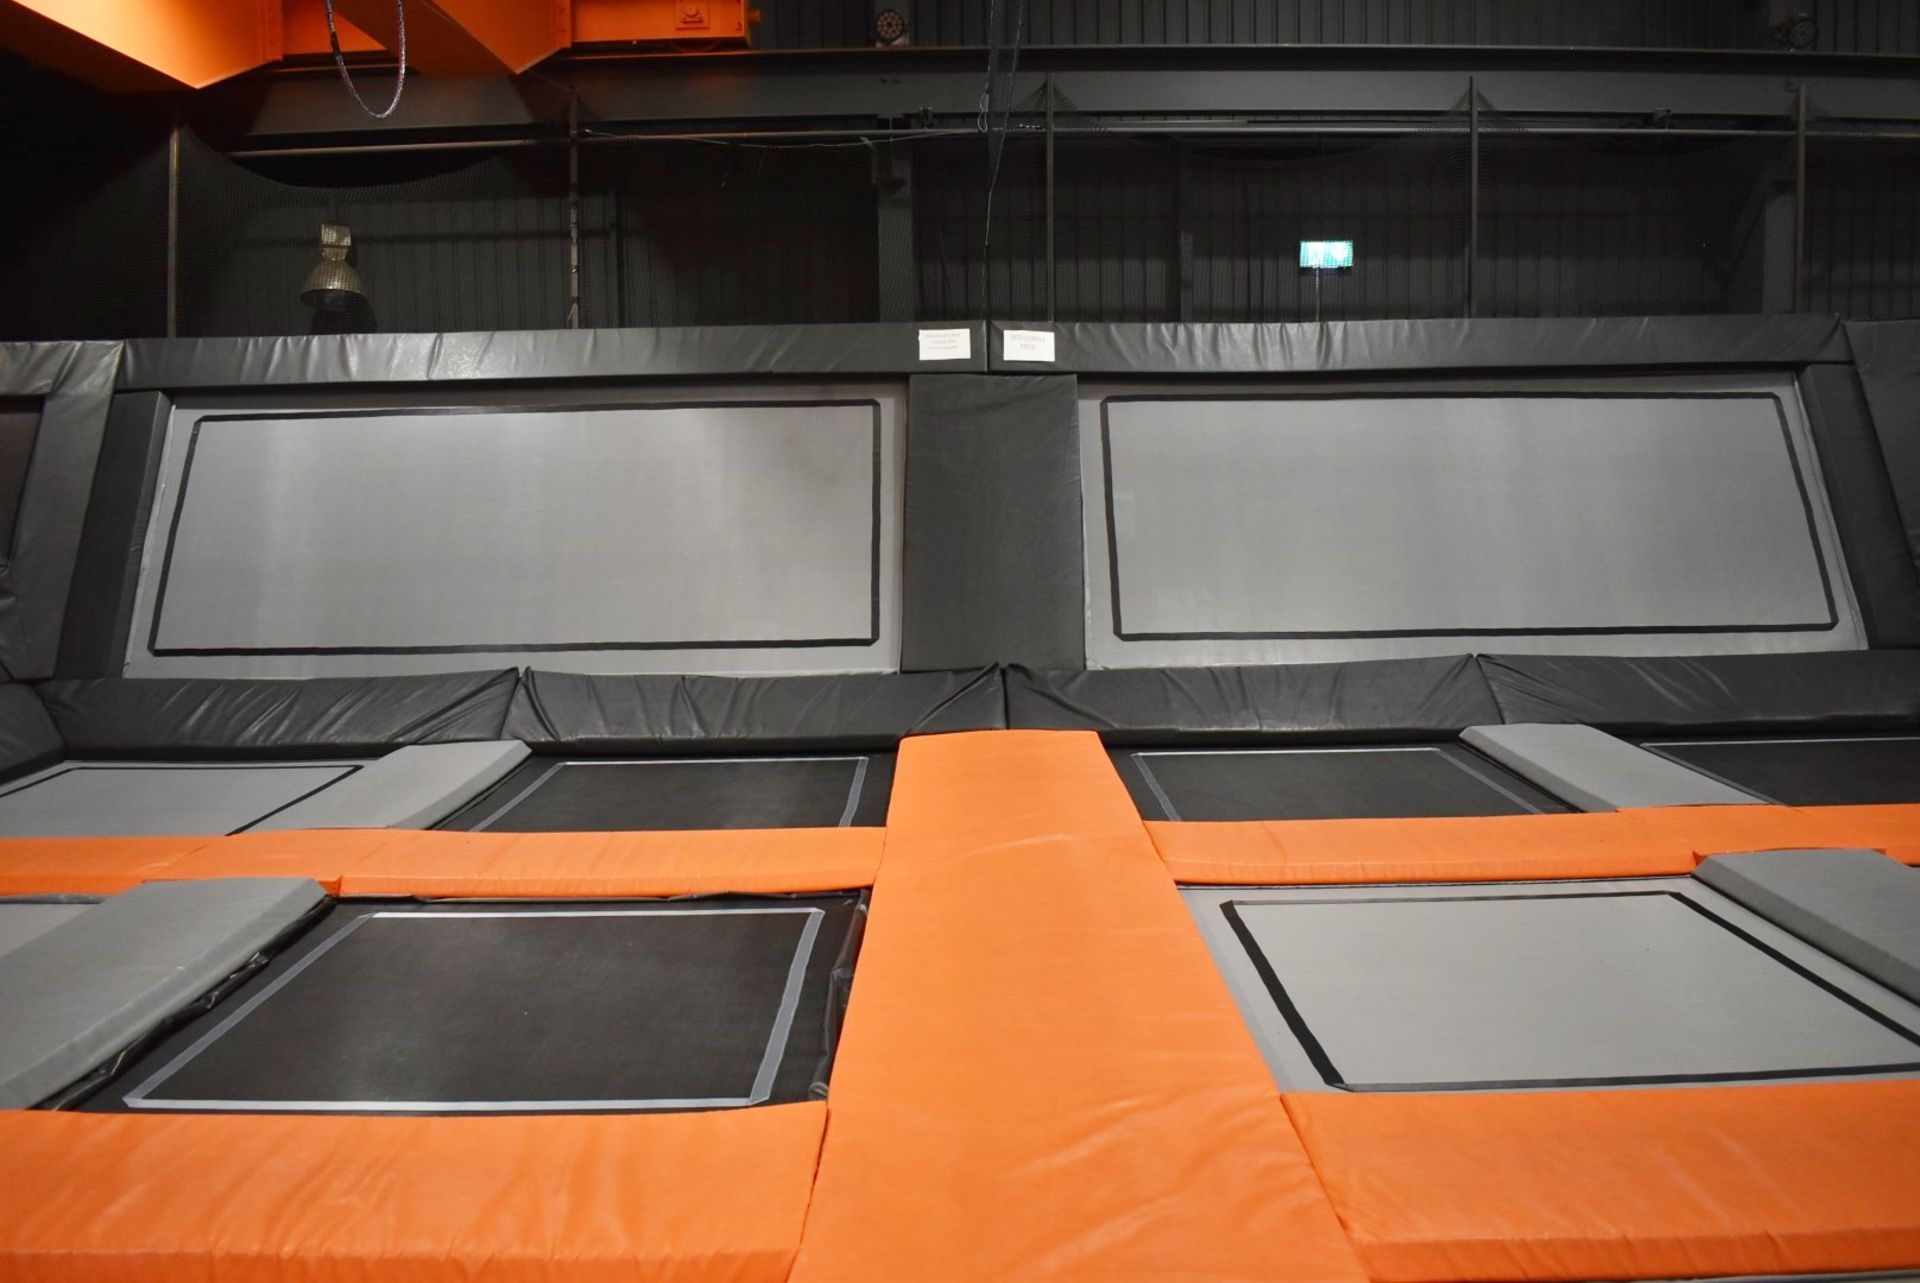 1 x Large Trampoline Park - Disassembled - Includes Dodgeball Arena And Jump Tower - CL766  - - Image 13 of 99